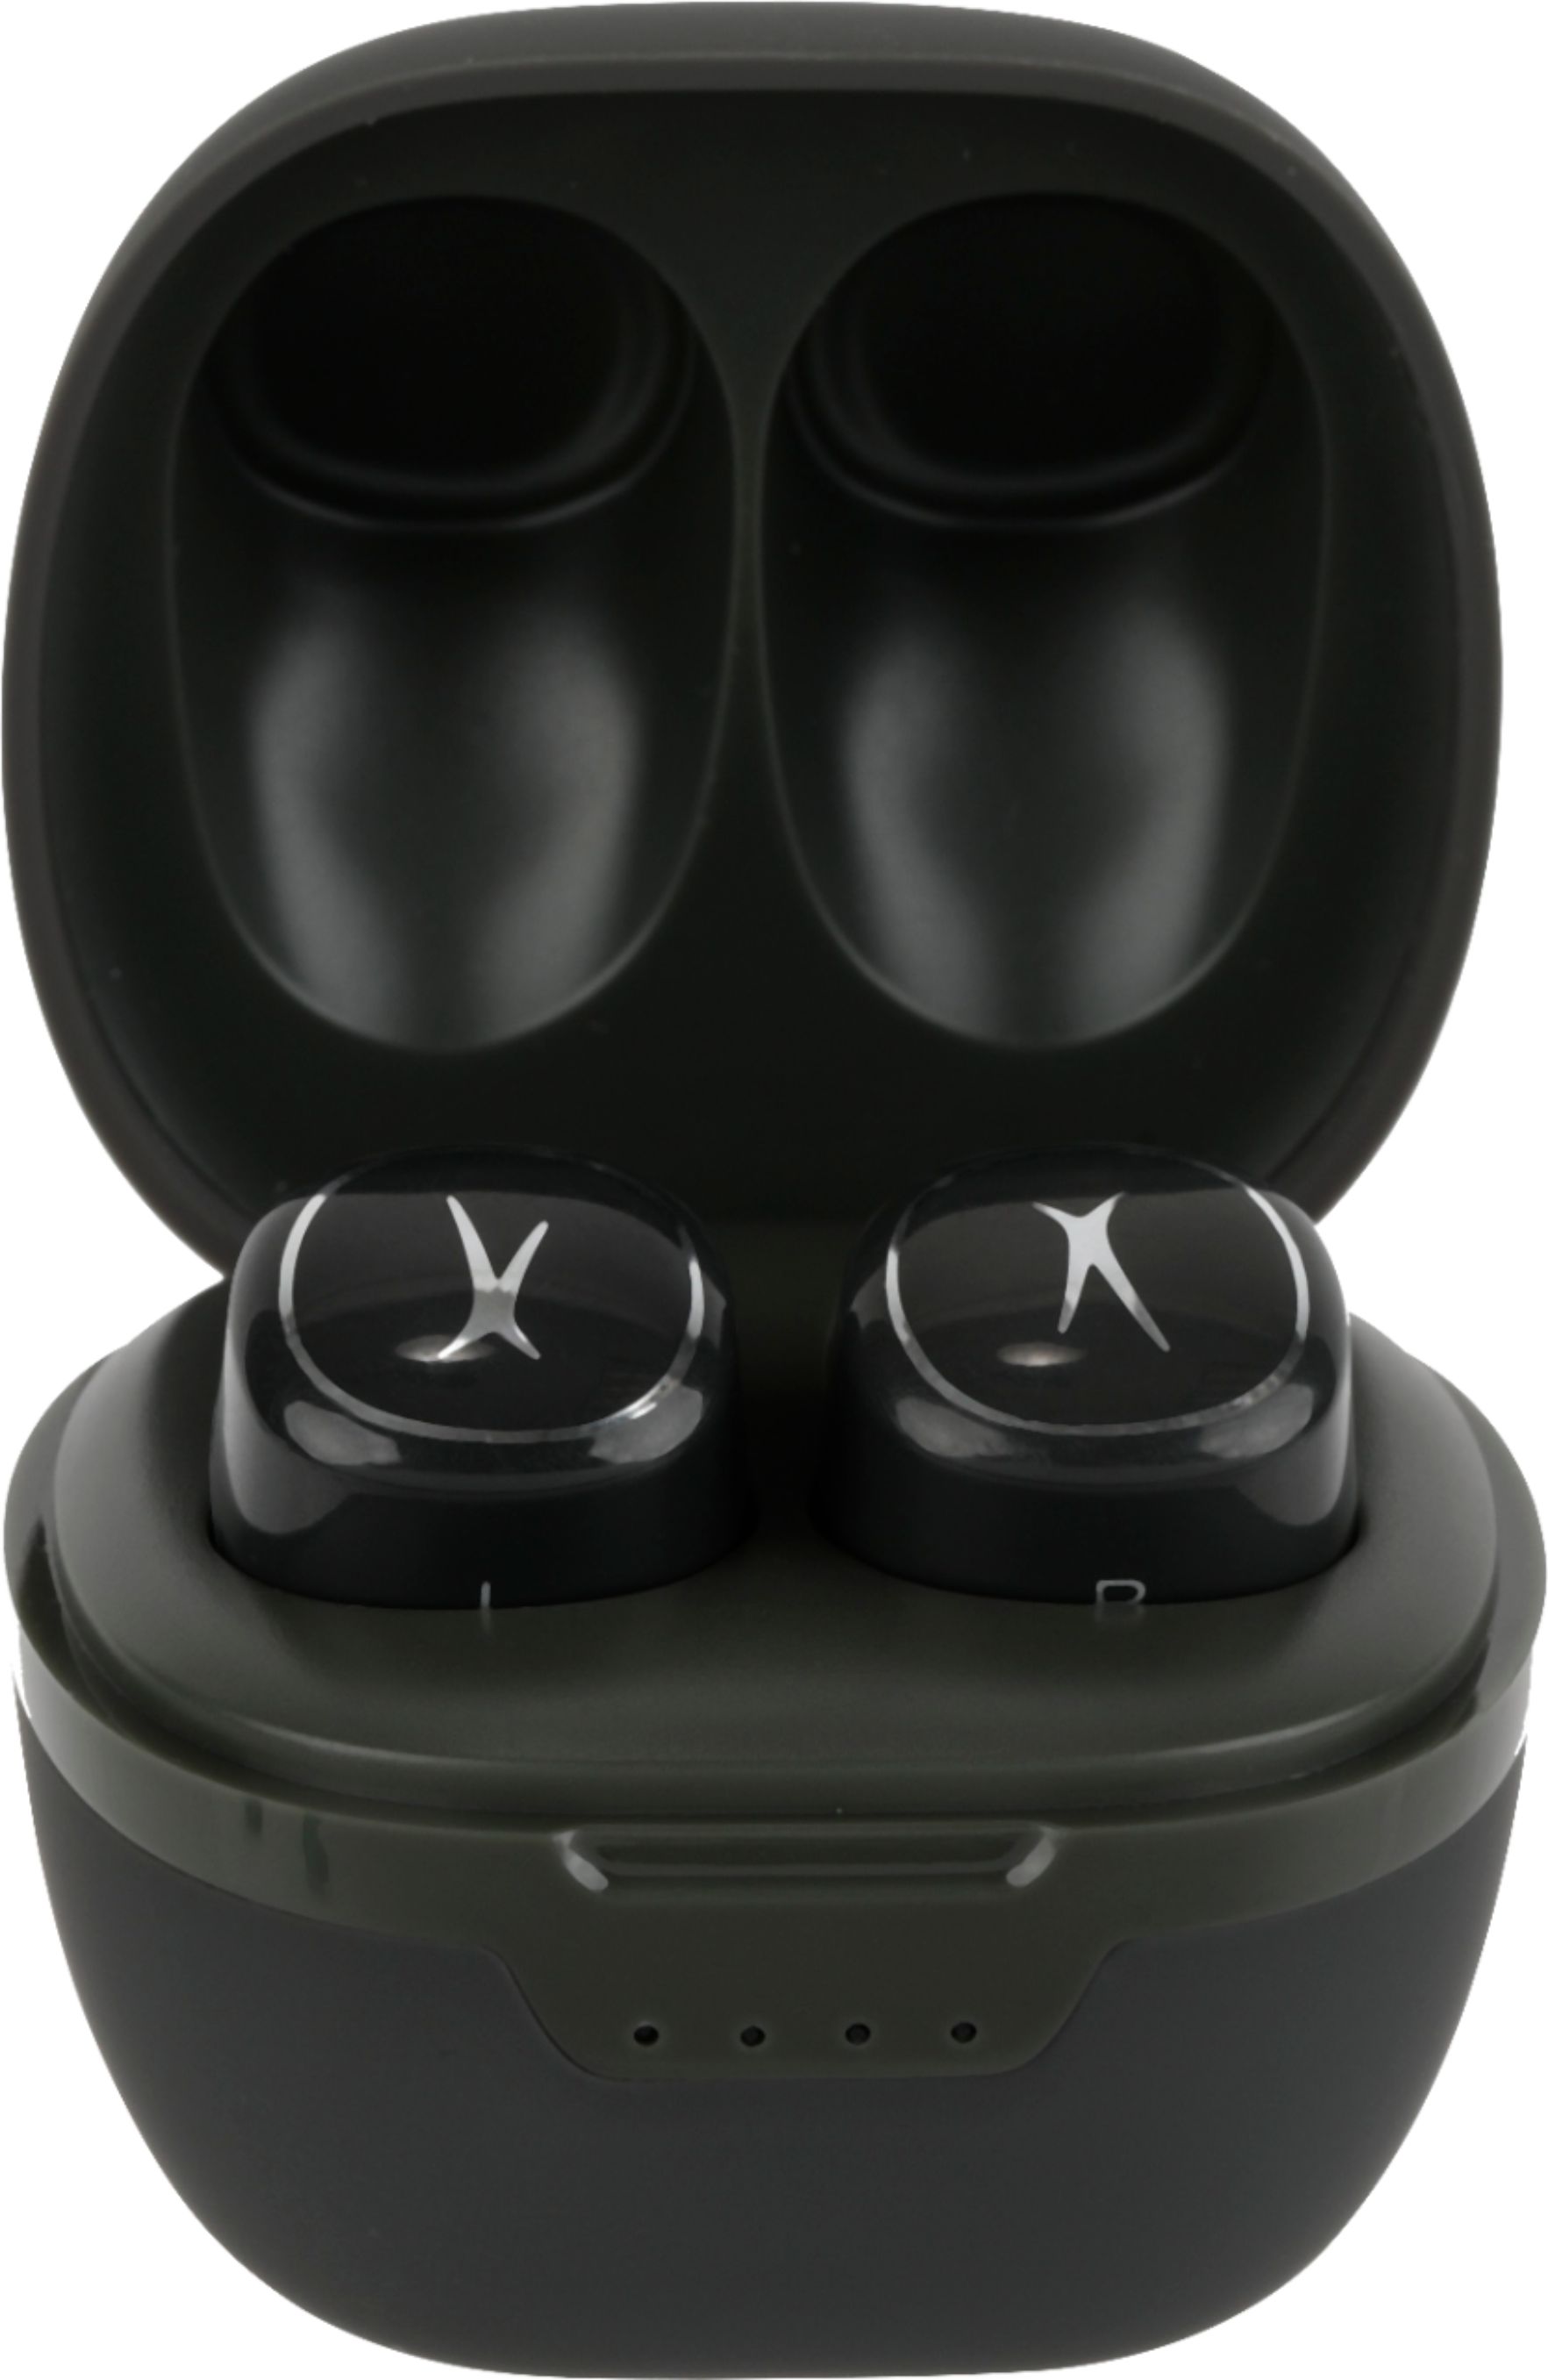 Angle View: Altec Lansing - NanoBuds2.0 True Wireless In-Ear Earbuds - Gray